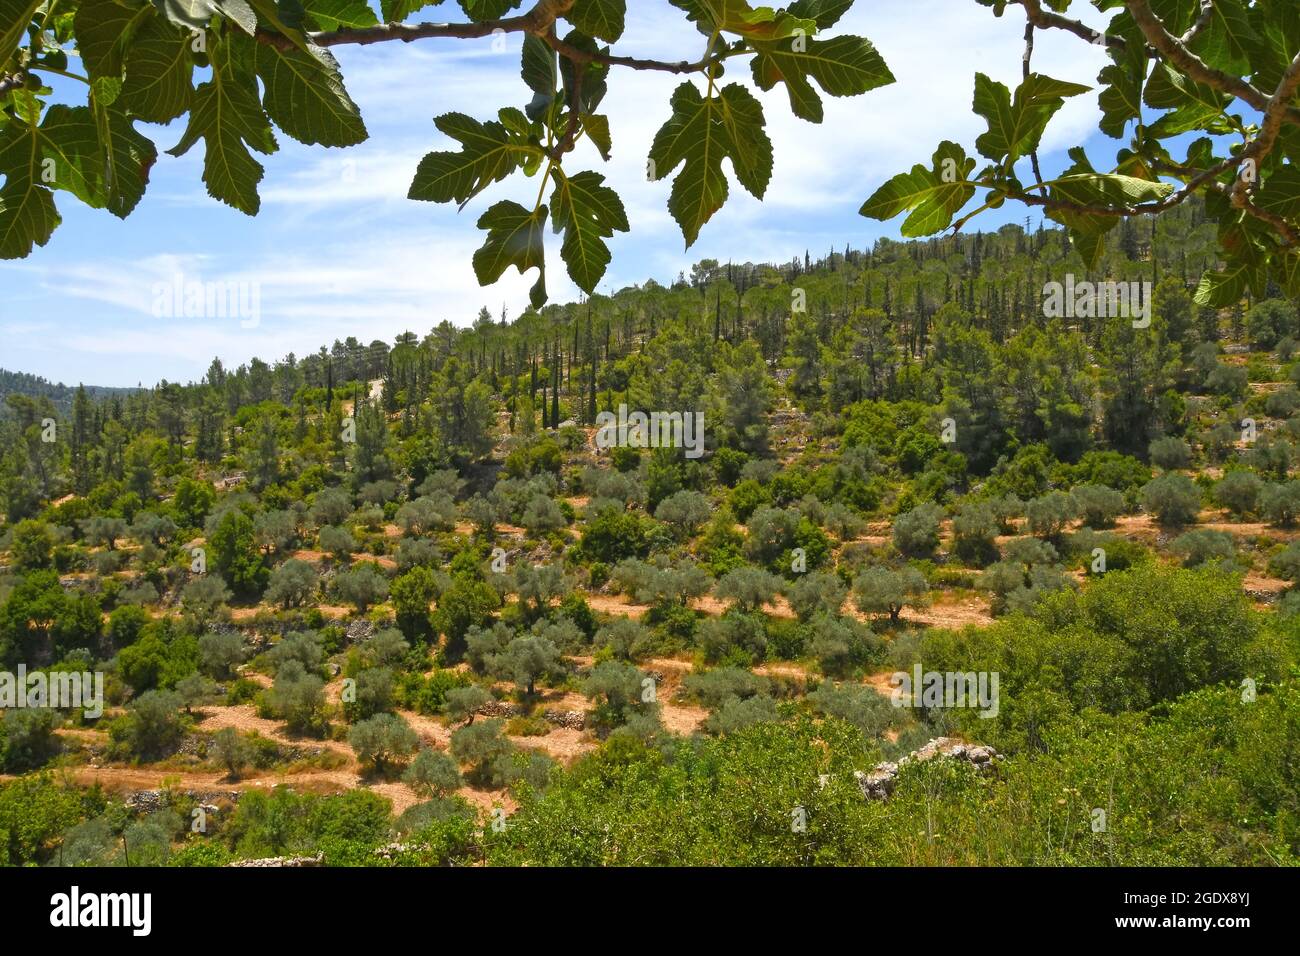 Jerusalem mountains and forests. Israel Stock Photo